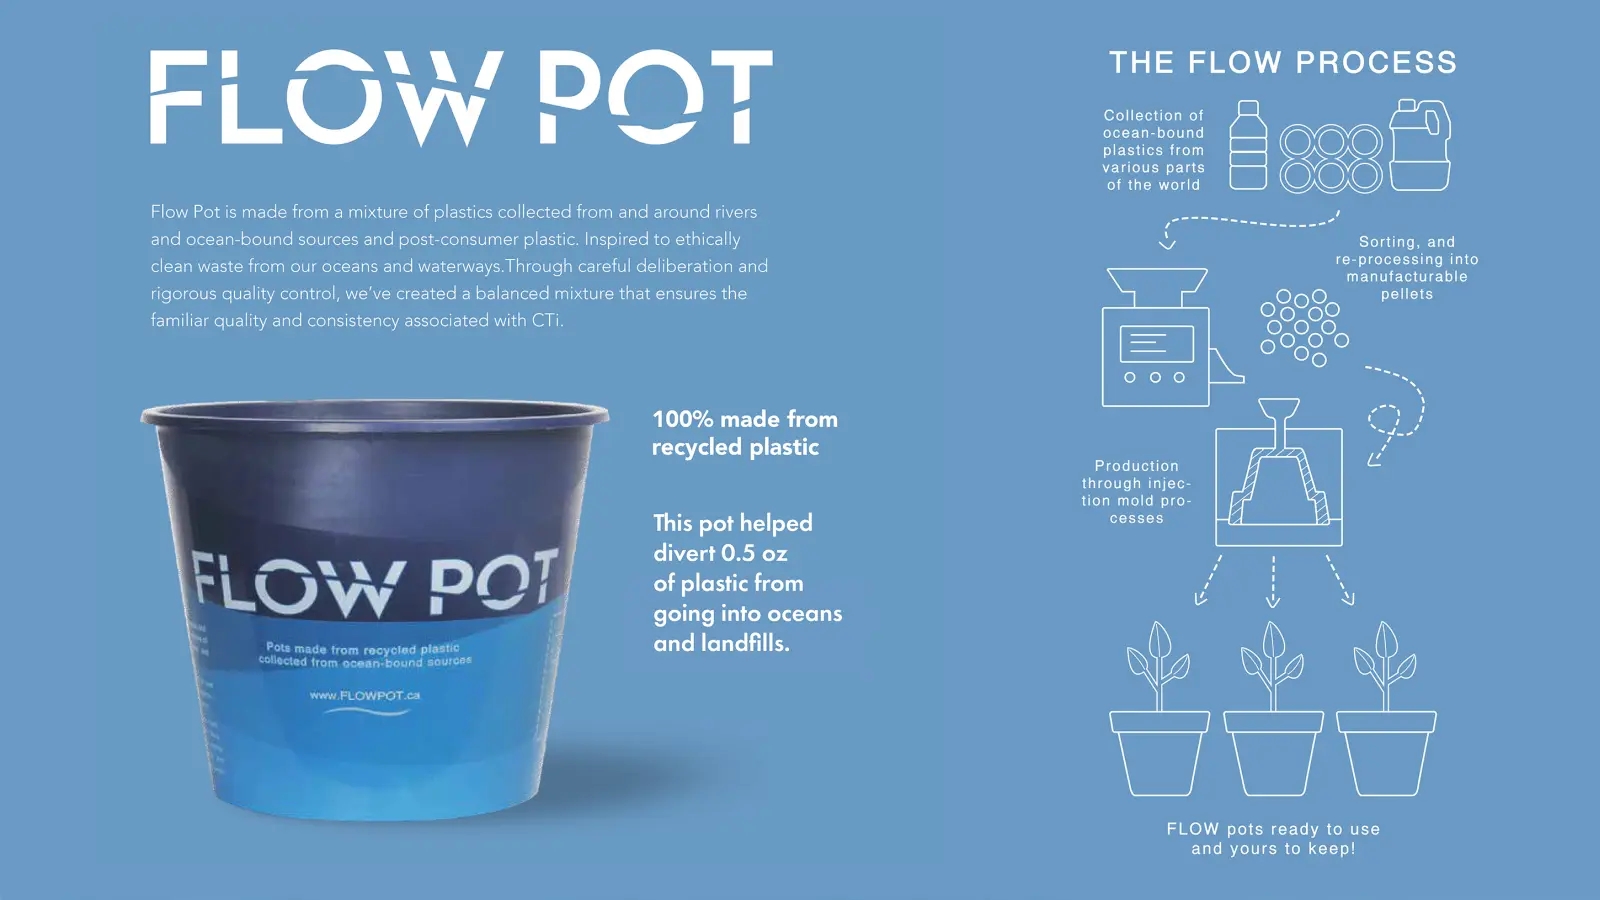 flowpot creation graphic displaying the process of creating recycled pots